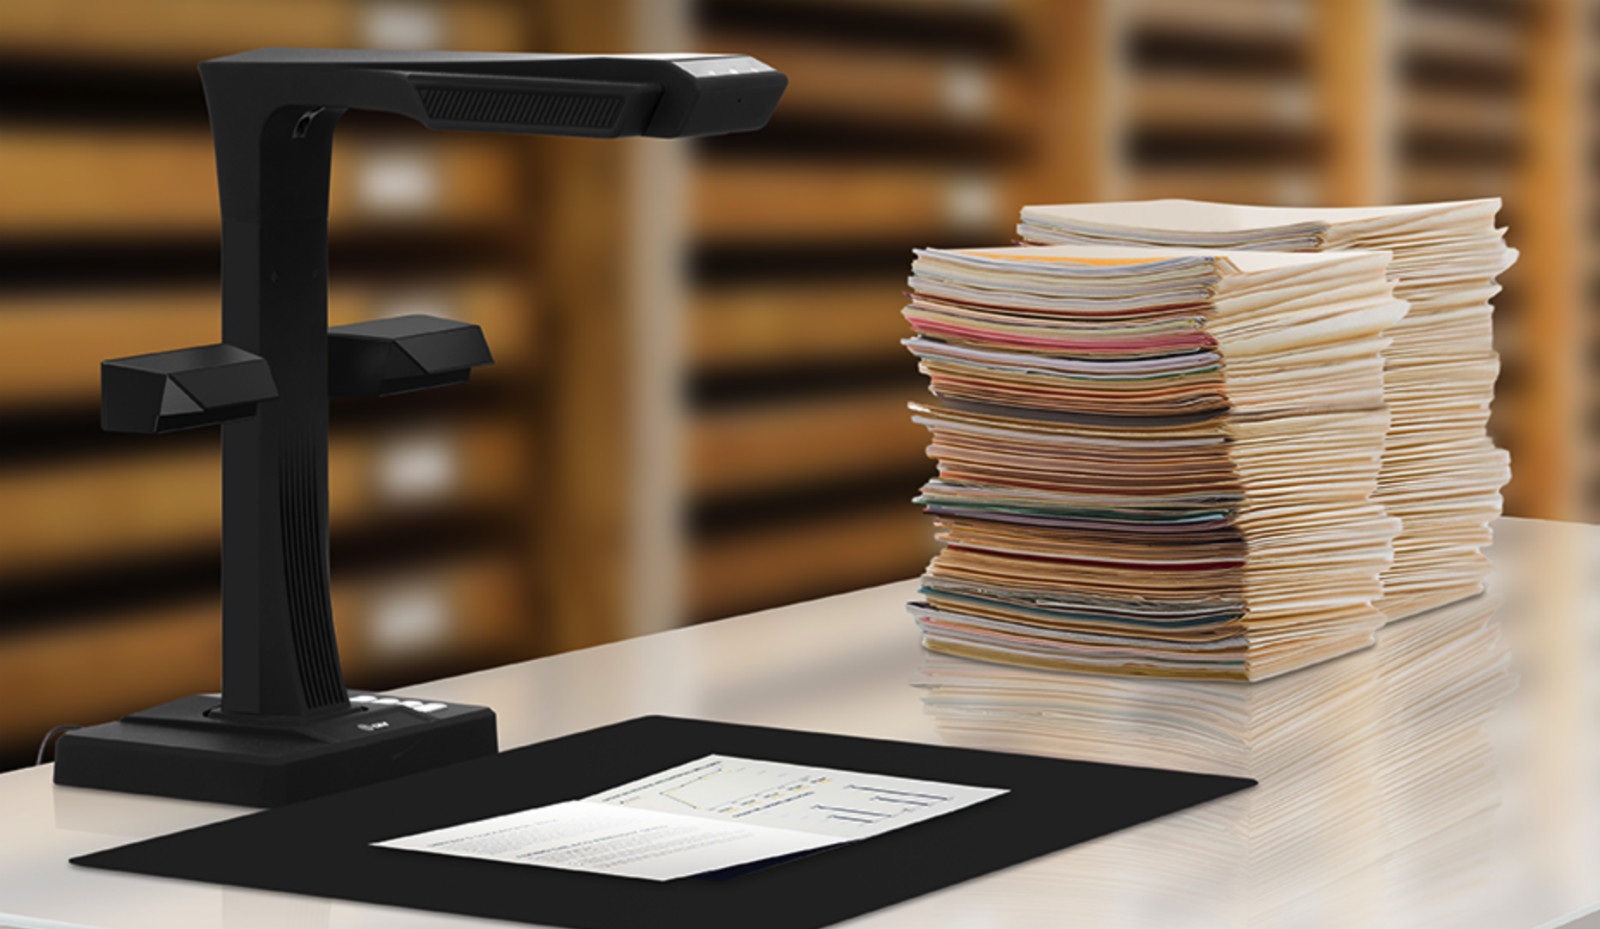 Best Document Scanners For Small Businesses 2020